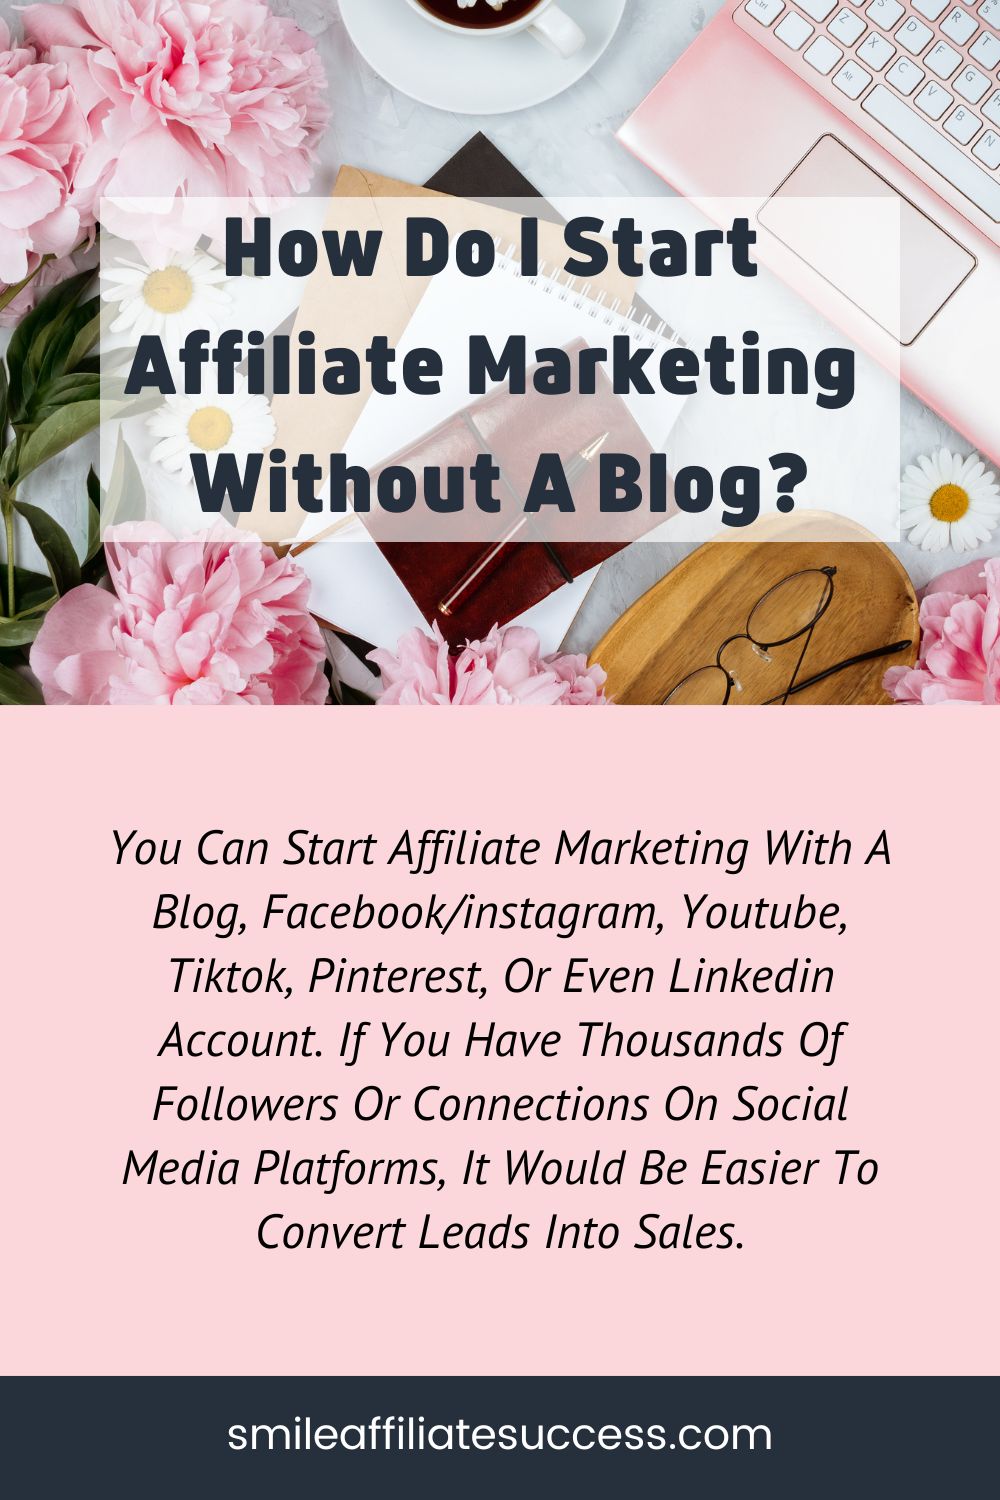 How Do I Start Affiliate Marketing Without A Blog?